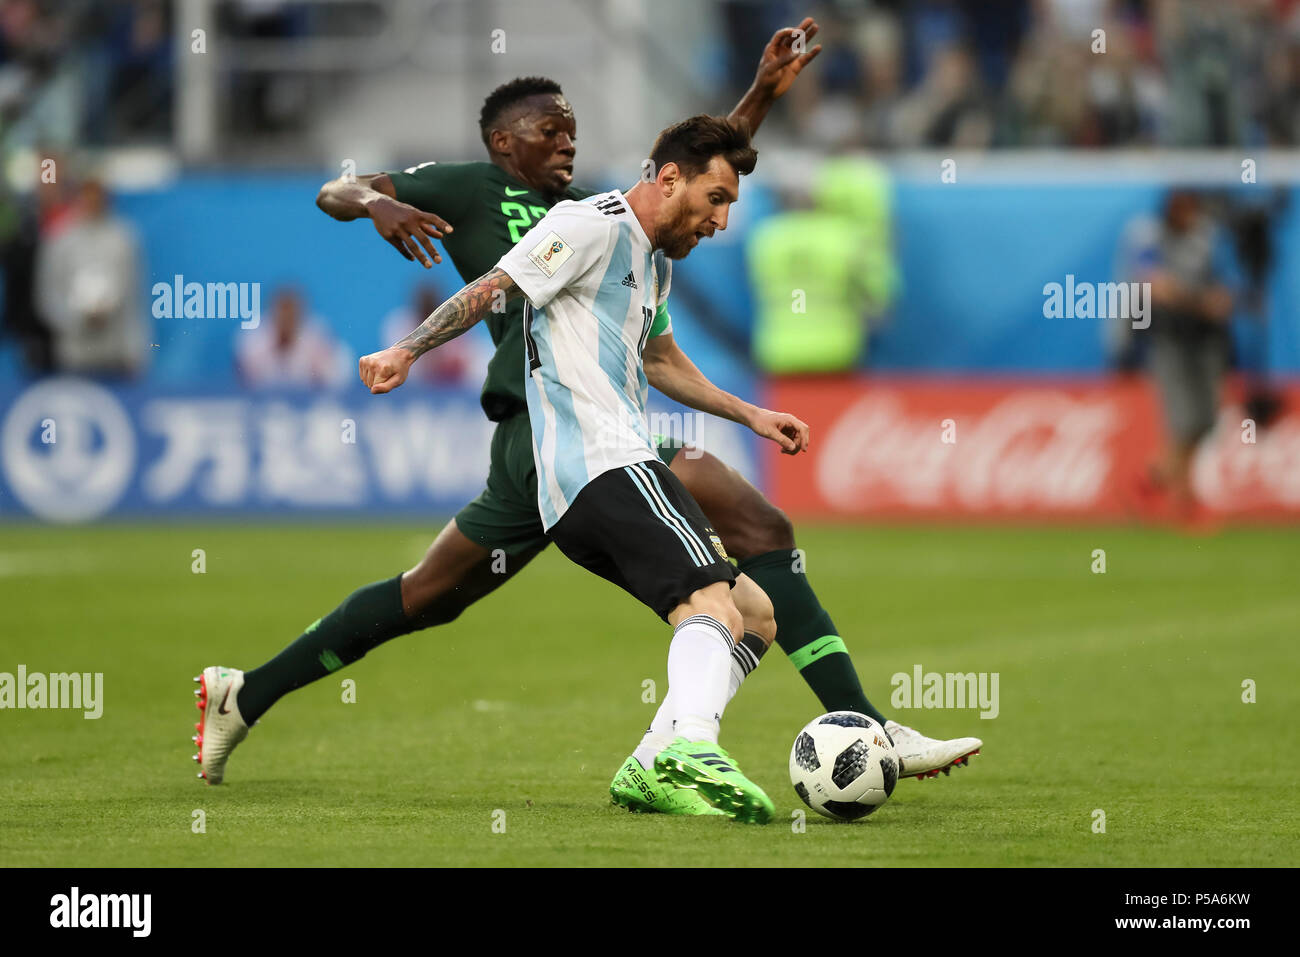 St Petersburg, Russia. 26th Jun, 2018. Lionel Messi of Argentina scores his side's first goal to make the score 1-0 during the 2018 FIFA World Cup Group D match between Nigeria and Argentina at Saint Petersburg Stadium on June 26th 2018 in Saint Petersburg, Russia. (Photo by Daniel Chesterton/phcimages.com) Credit: PHC Images/Alamy Live News Stock Photo